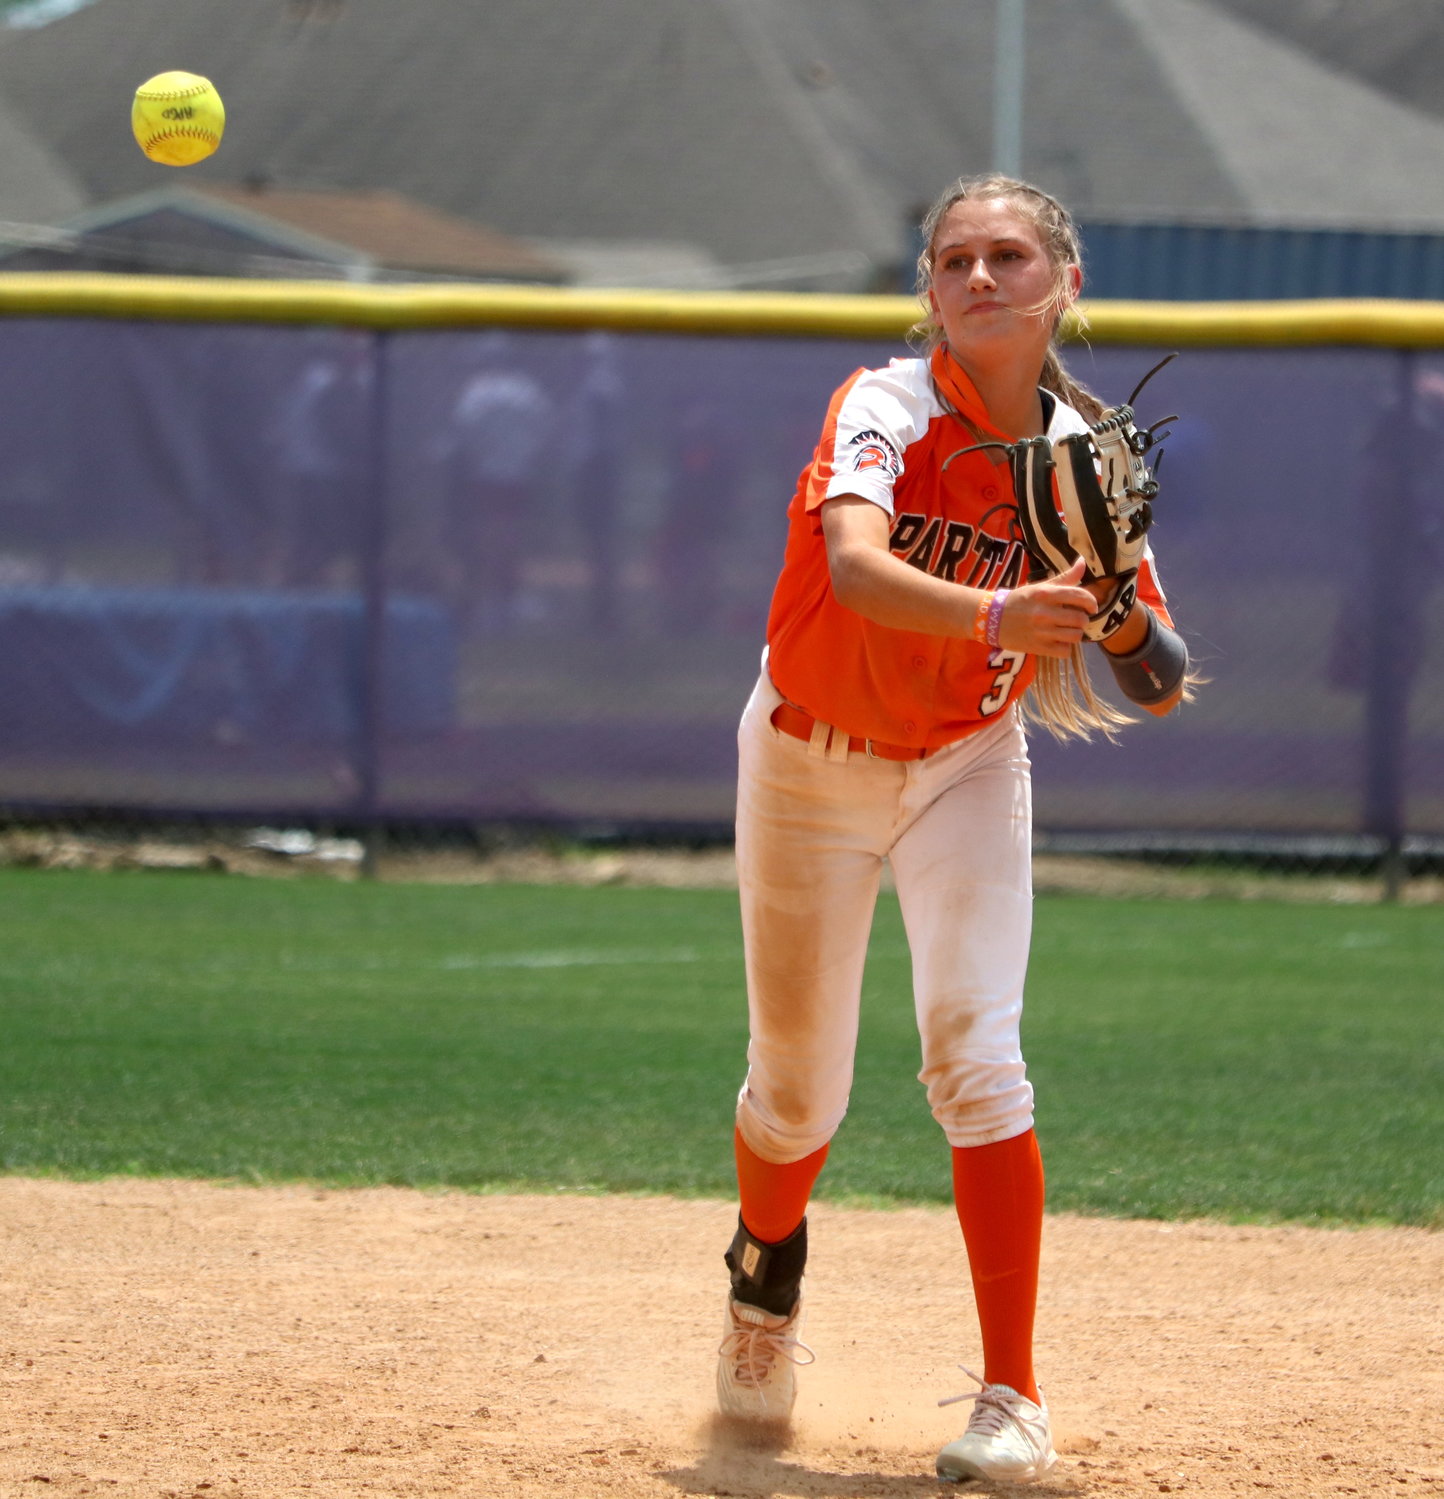 Mackenzie Stutts makes a throw to first base during Saturday’s bi-district round game between Seven Lakes and Ridge Point at the Ridge Point softball field.